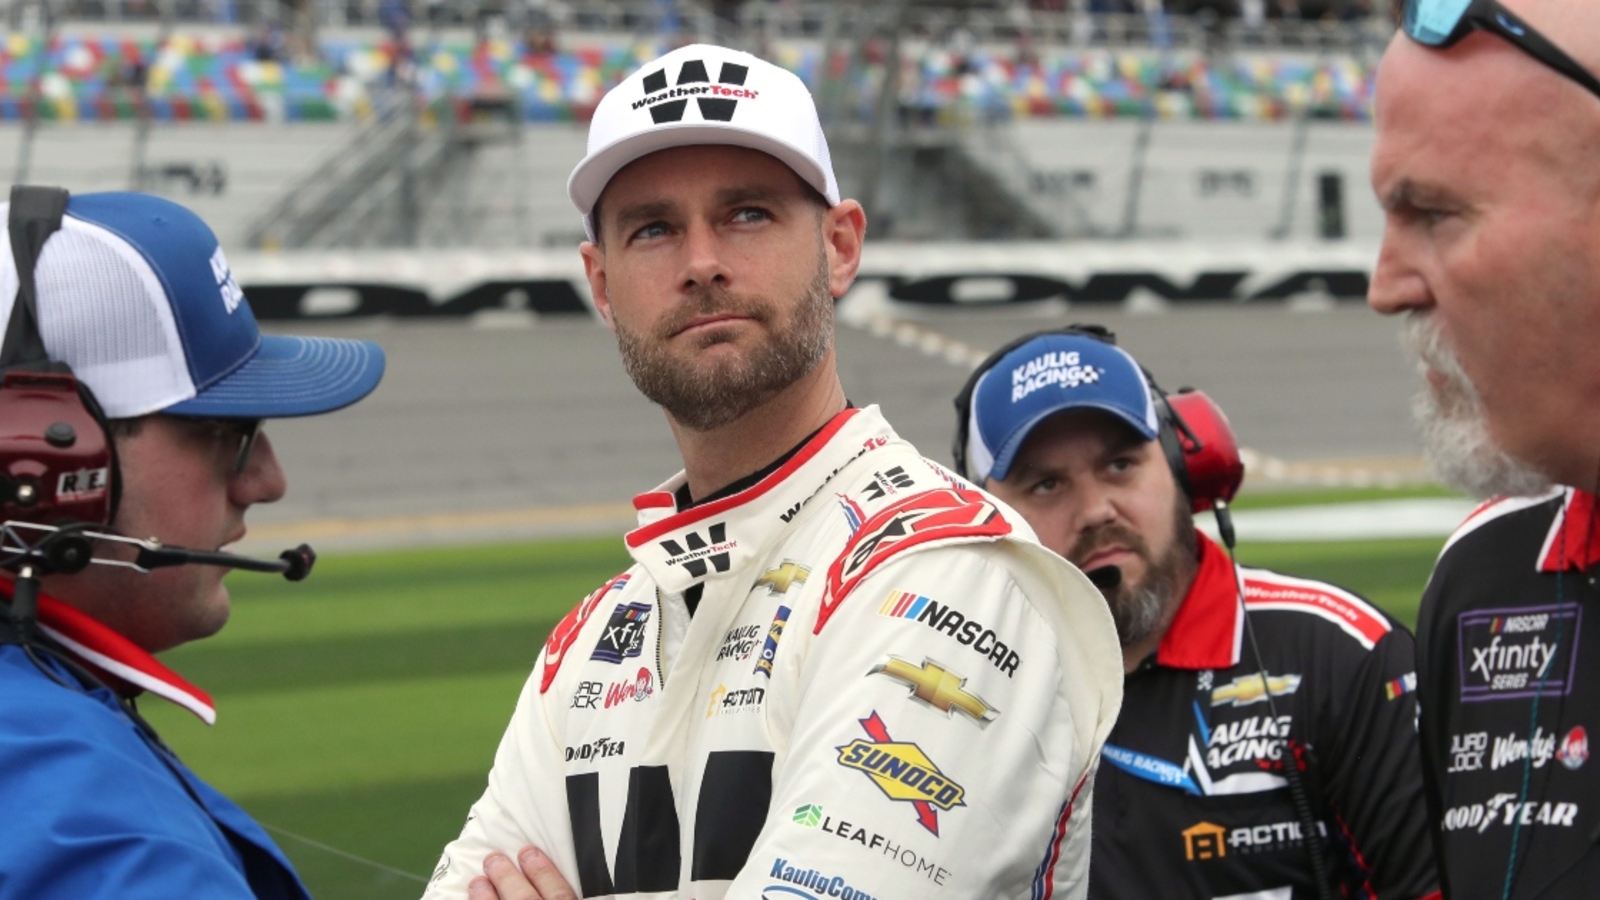 Shane van Gisbergen is fired up after first race at Daytona, apologizes to Jeb Burton